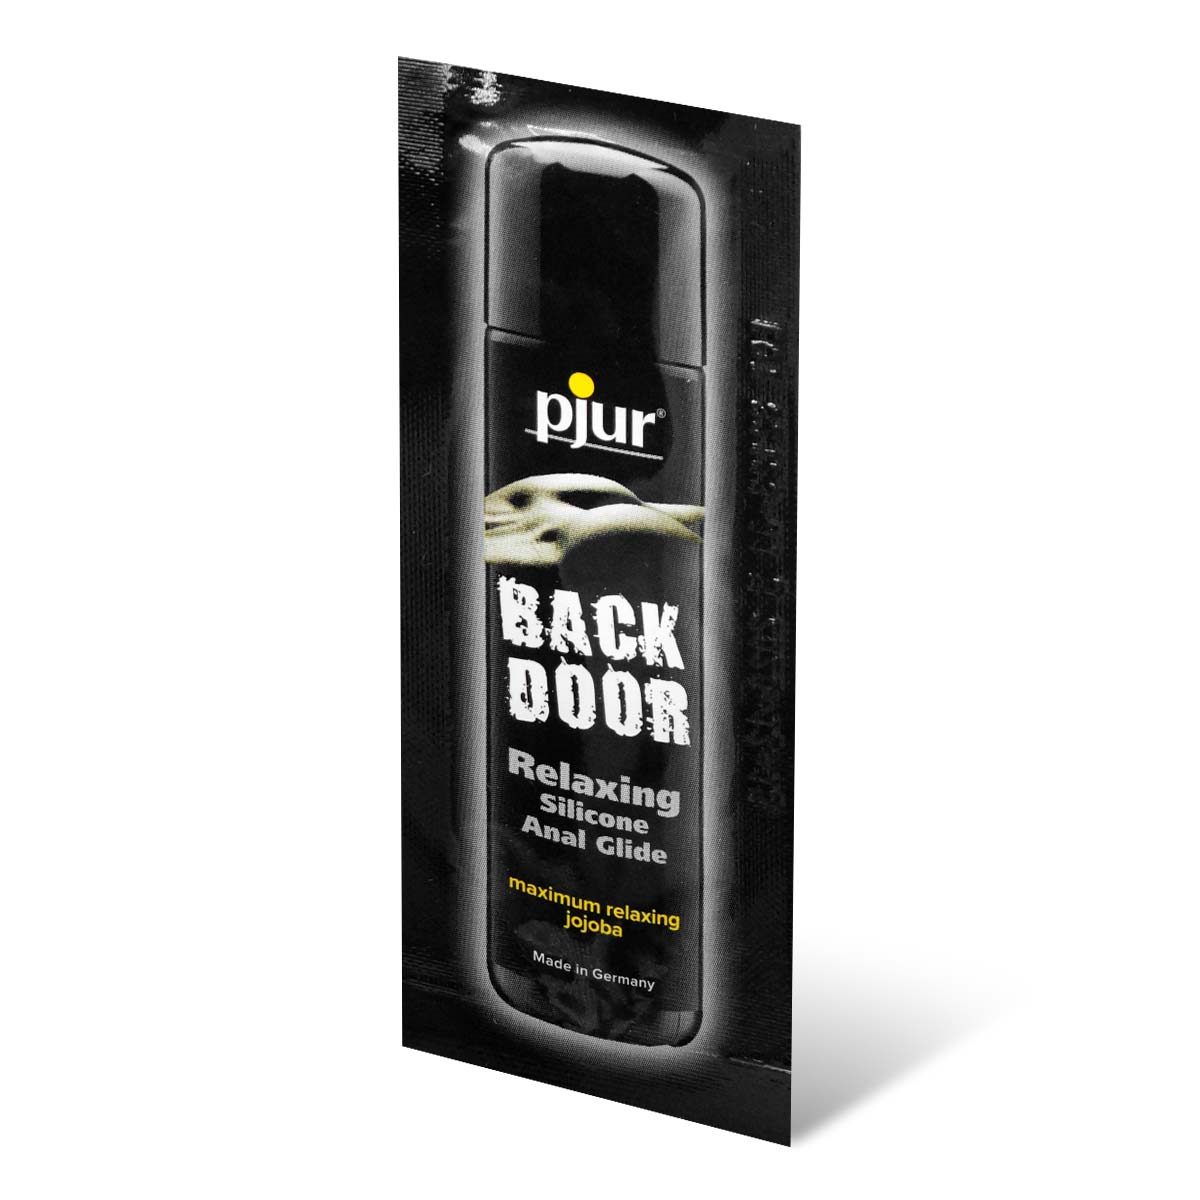 pjur BACK DOOR RELAXING Silicone Anal Glide 1.5ml Silicone-based Lubricant-p_1